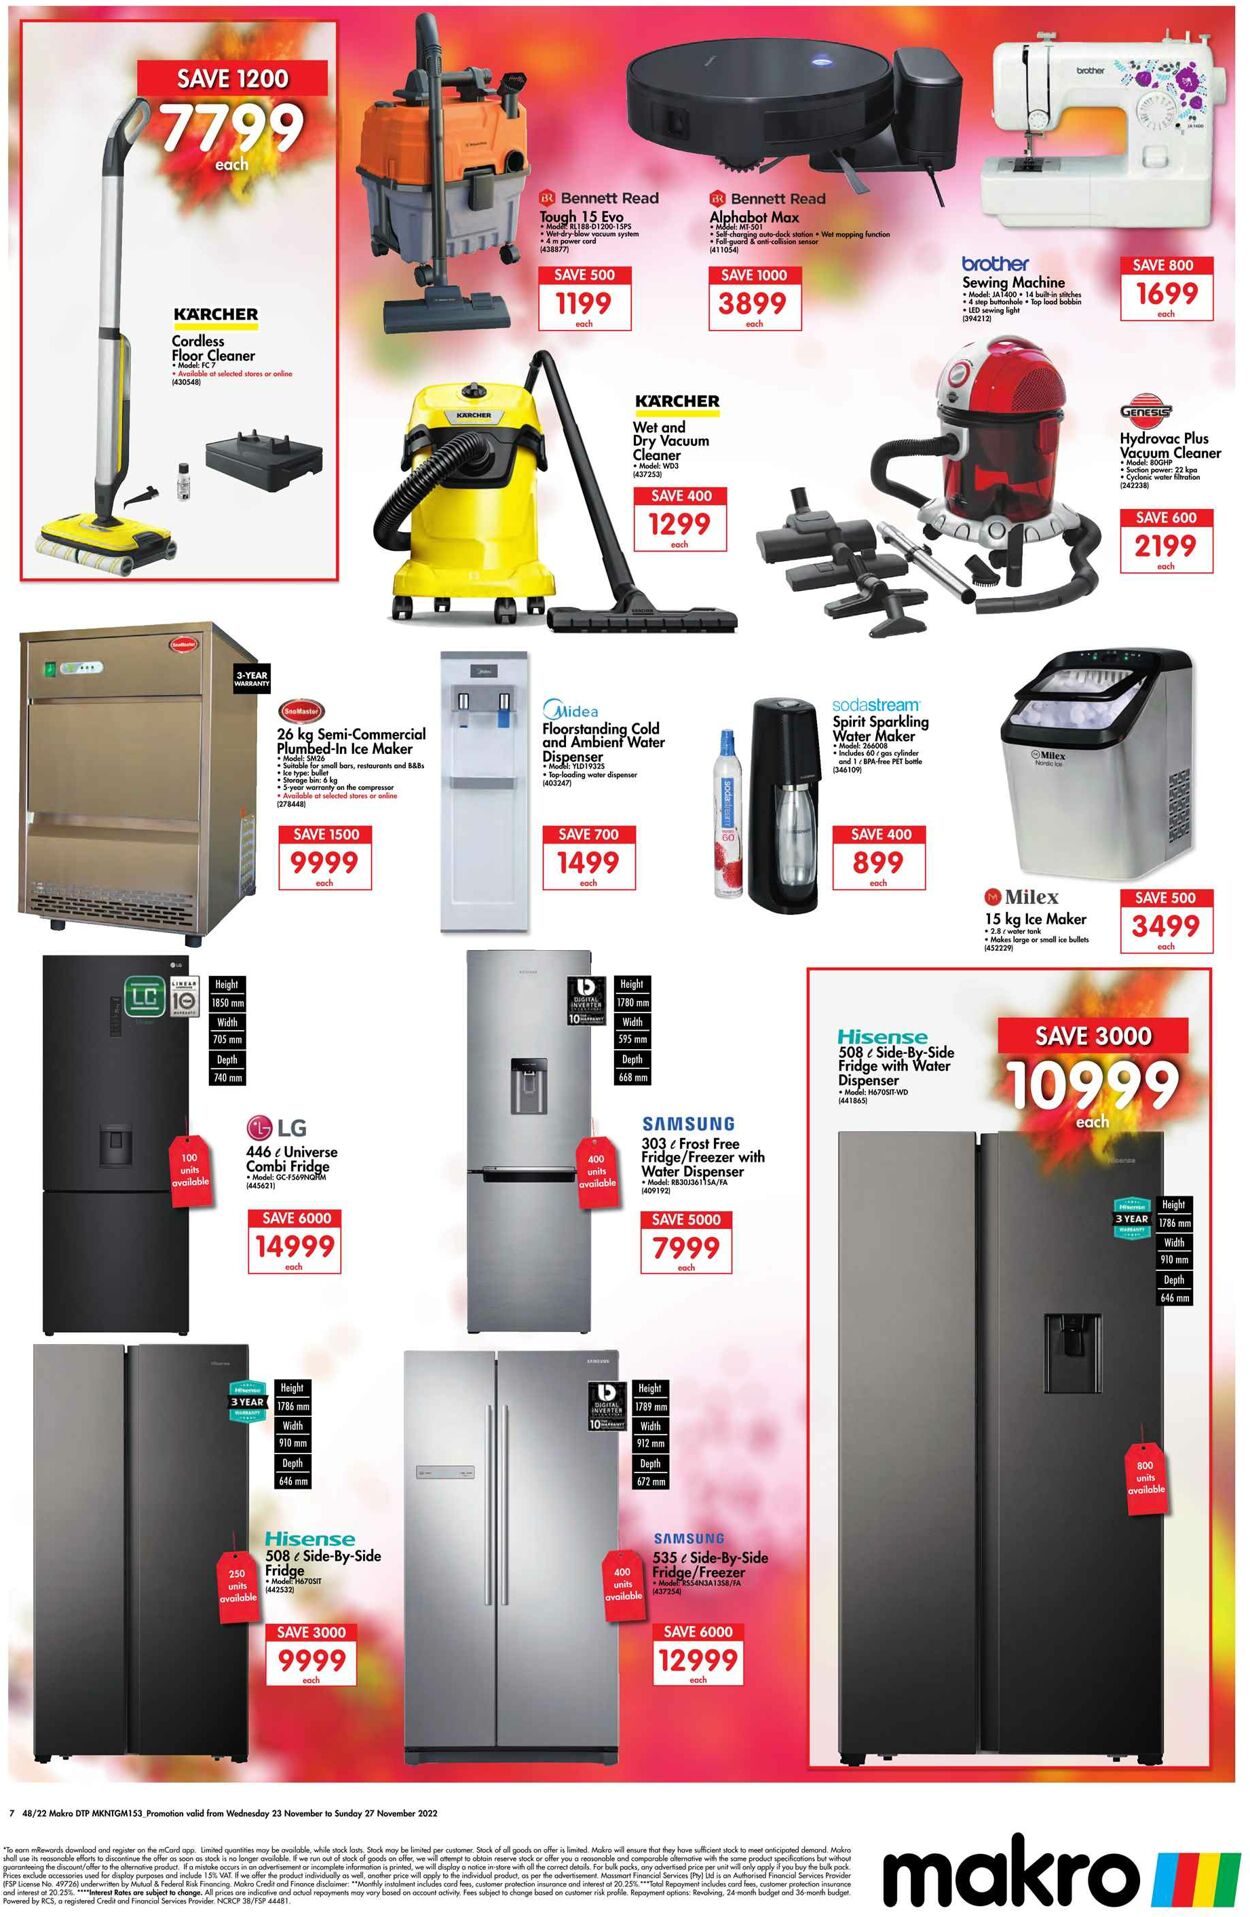 Makro Promotional Leaflet - Black Friday 2023 - Valid from 23.11 to 27.11 -  Page nb 7 - za-specials.com